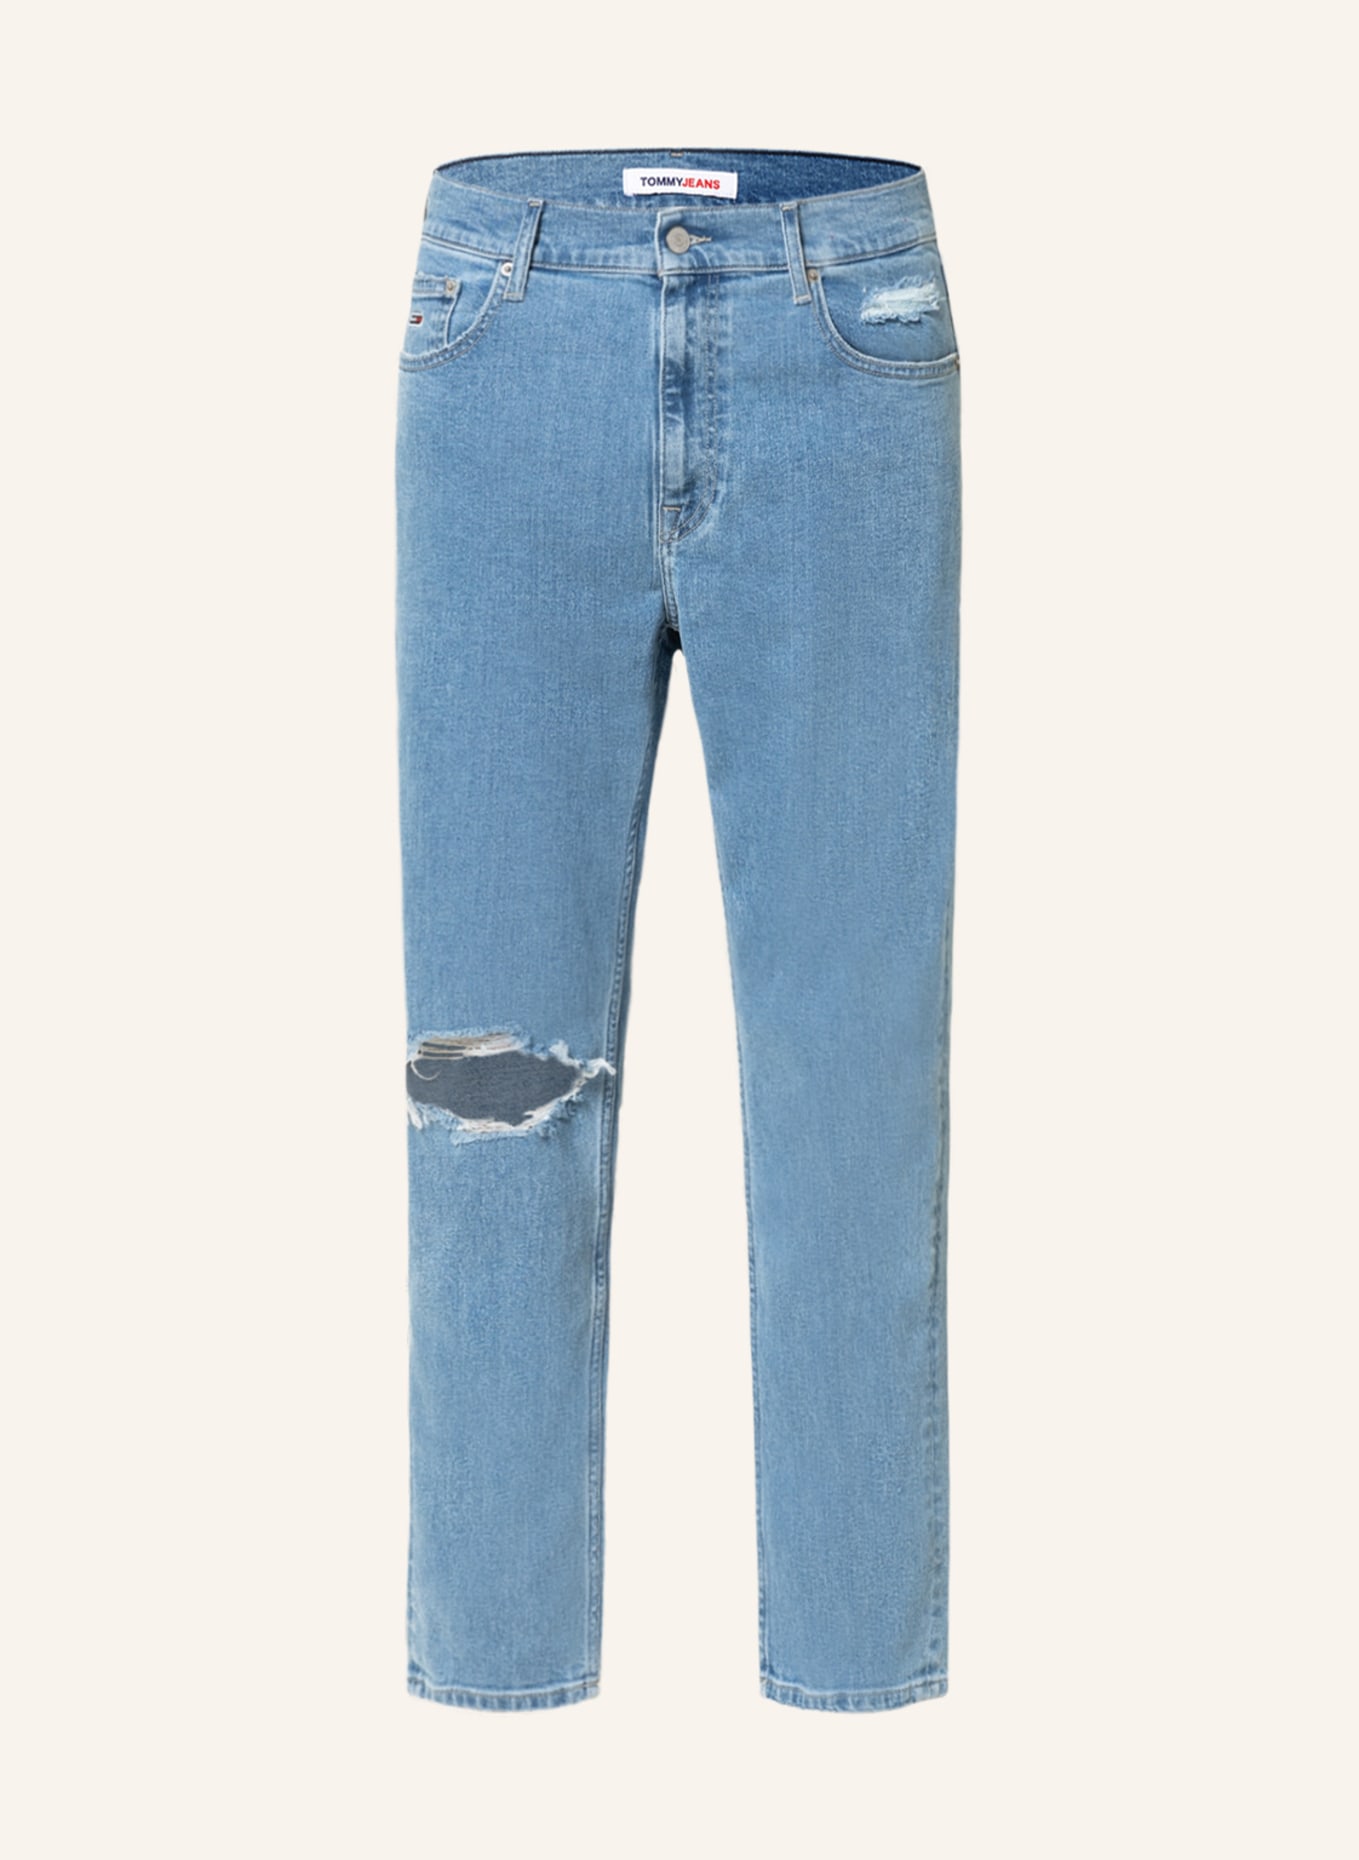 TOMMY JEANS Destroyed Jeans DAD JEAN Regular Tapered Fit in 1ab denim light | Weite Jeans